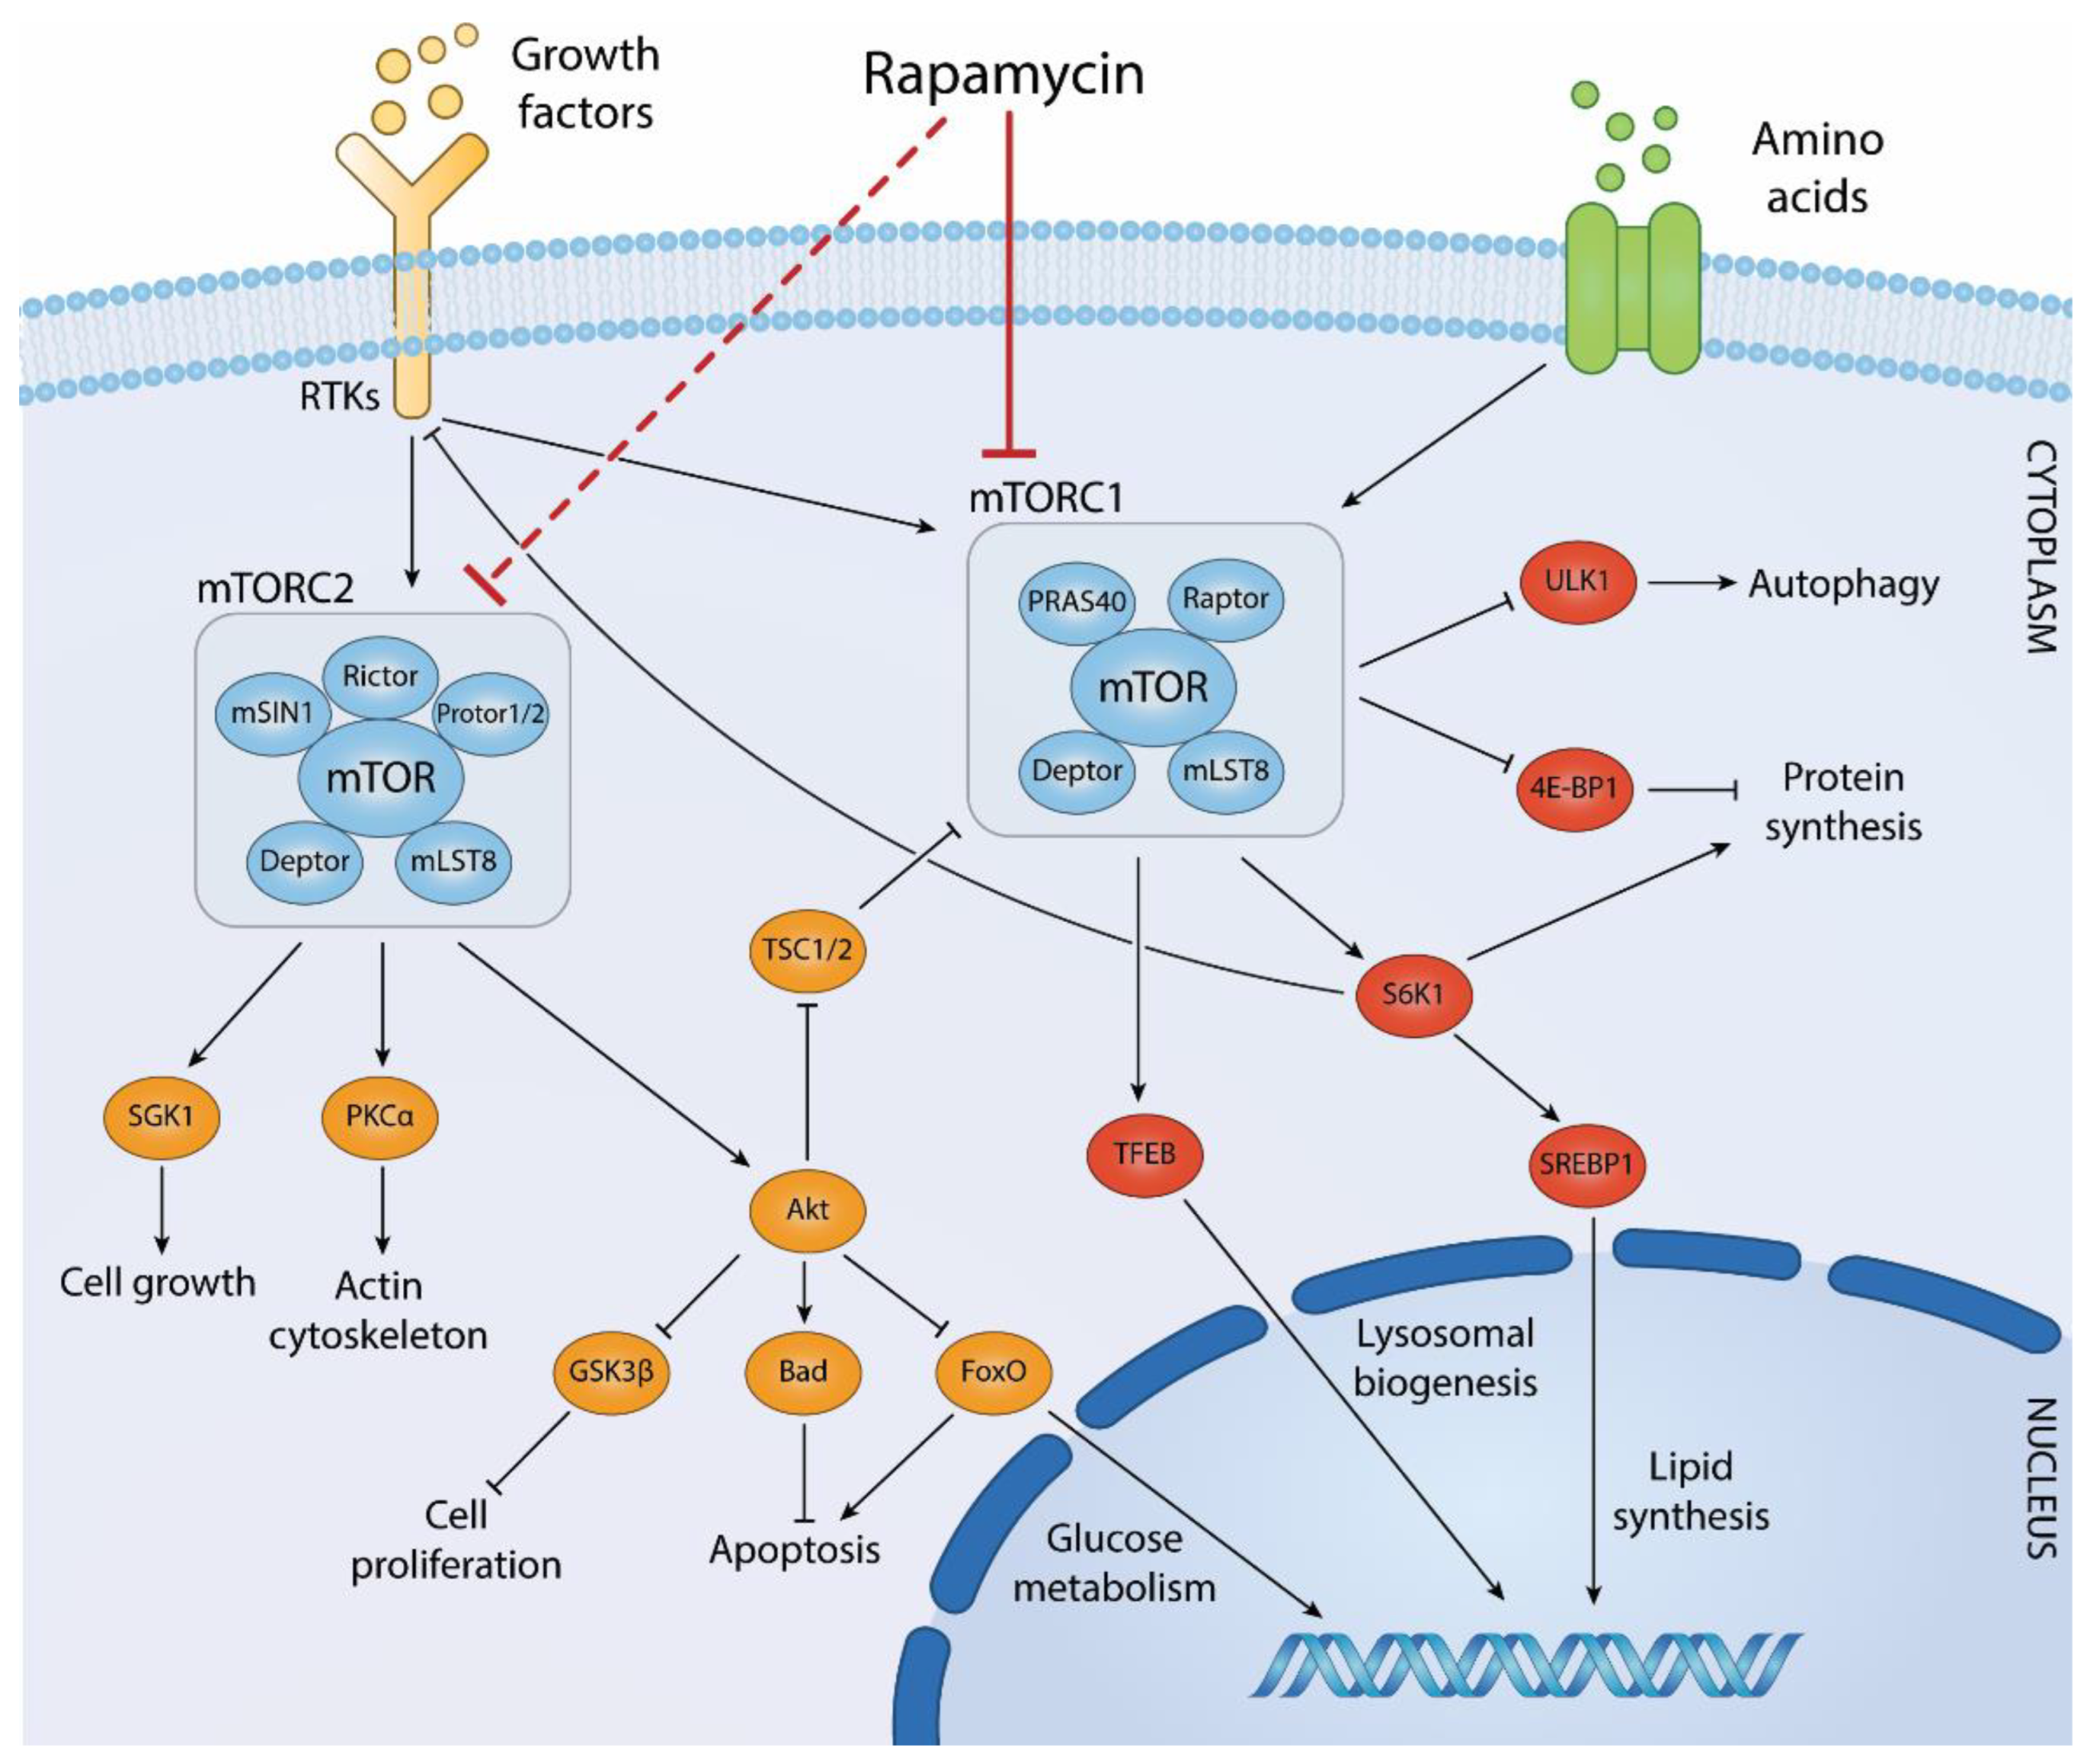 Figure 1 Biological processes regulated by mTOR complexes and downstream effector pathways. (Centonze, 2022)